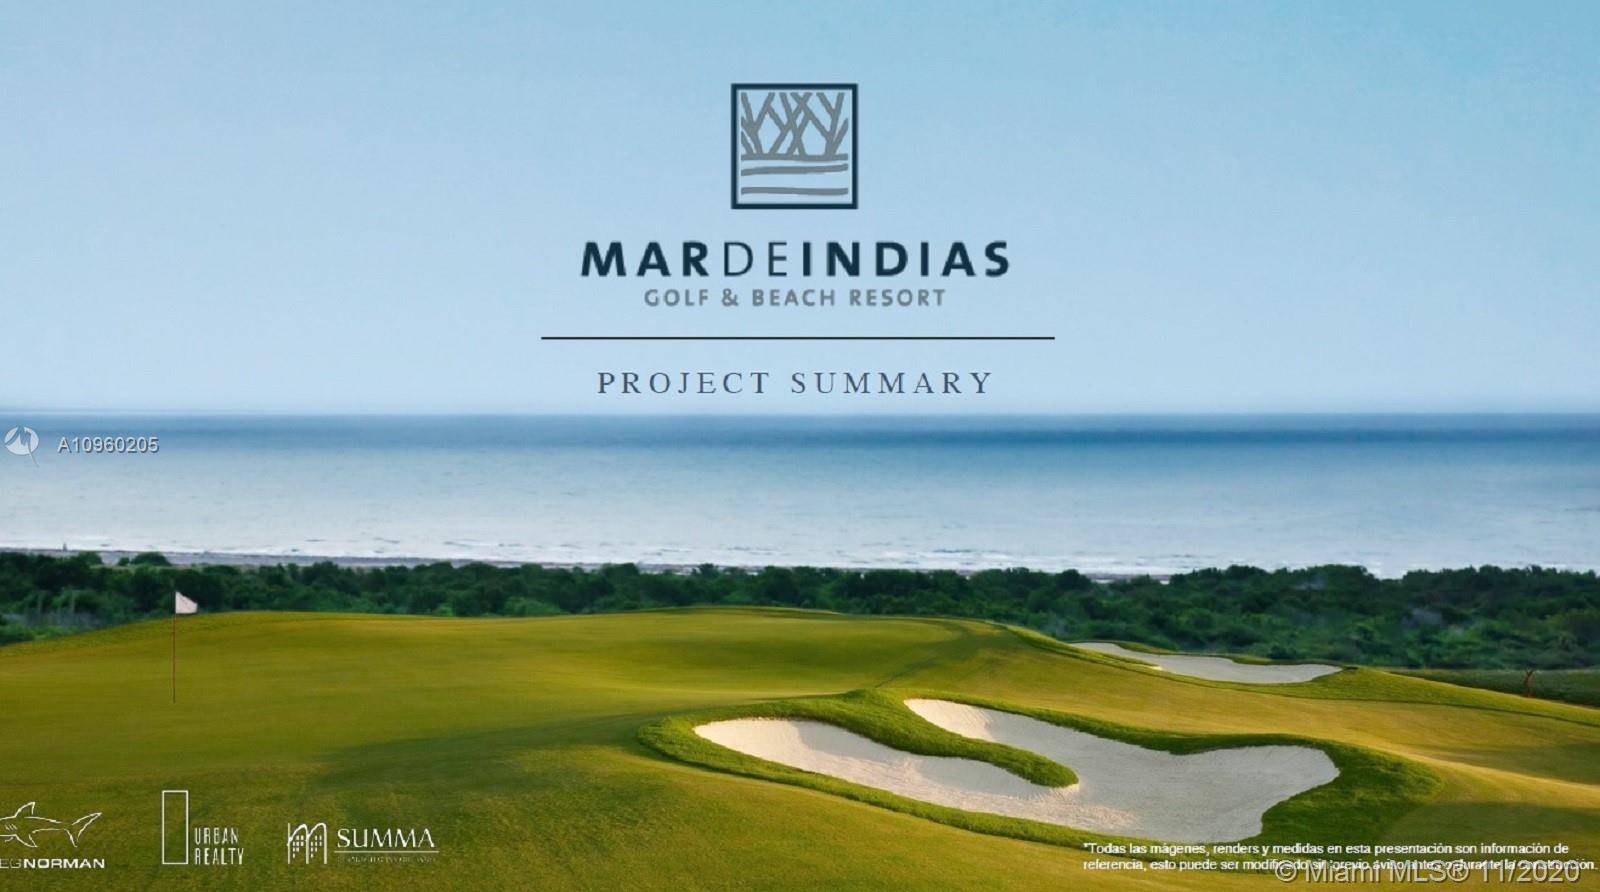 MAR DE INDIAS Developer opportunity, complex is composed of a wide range of amenities design by int'l and local professionals composed among others, the Master Plan Landscape Urbanism and Design ...